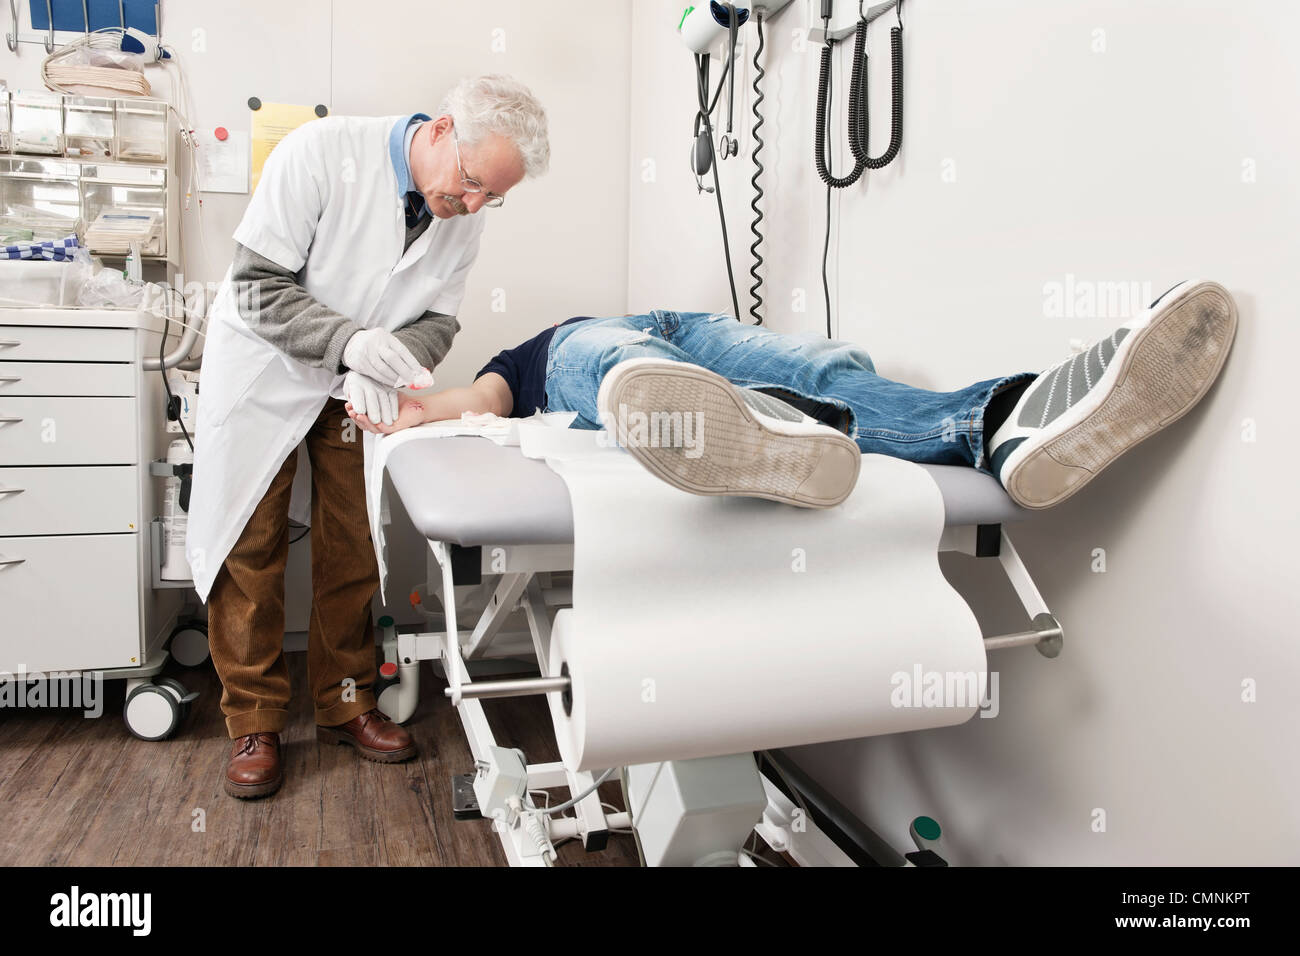 Doctor cleaning a wound in a hospital emergency medical examination room Stock Photo